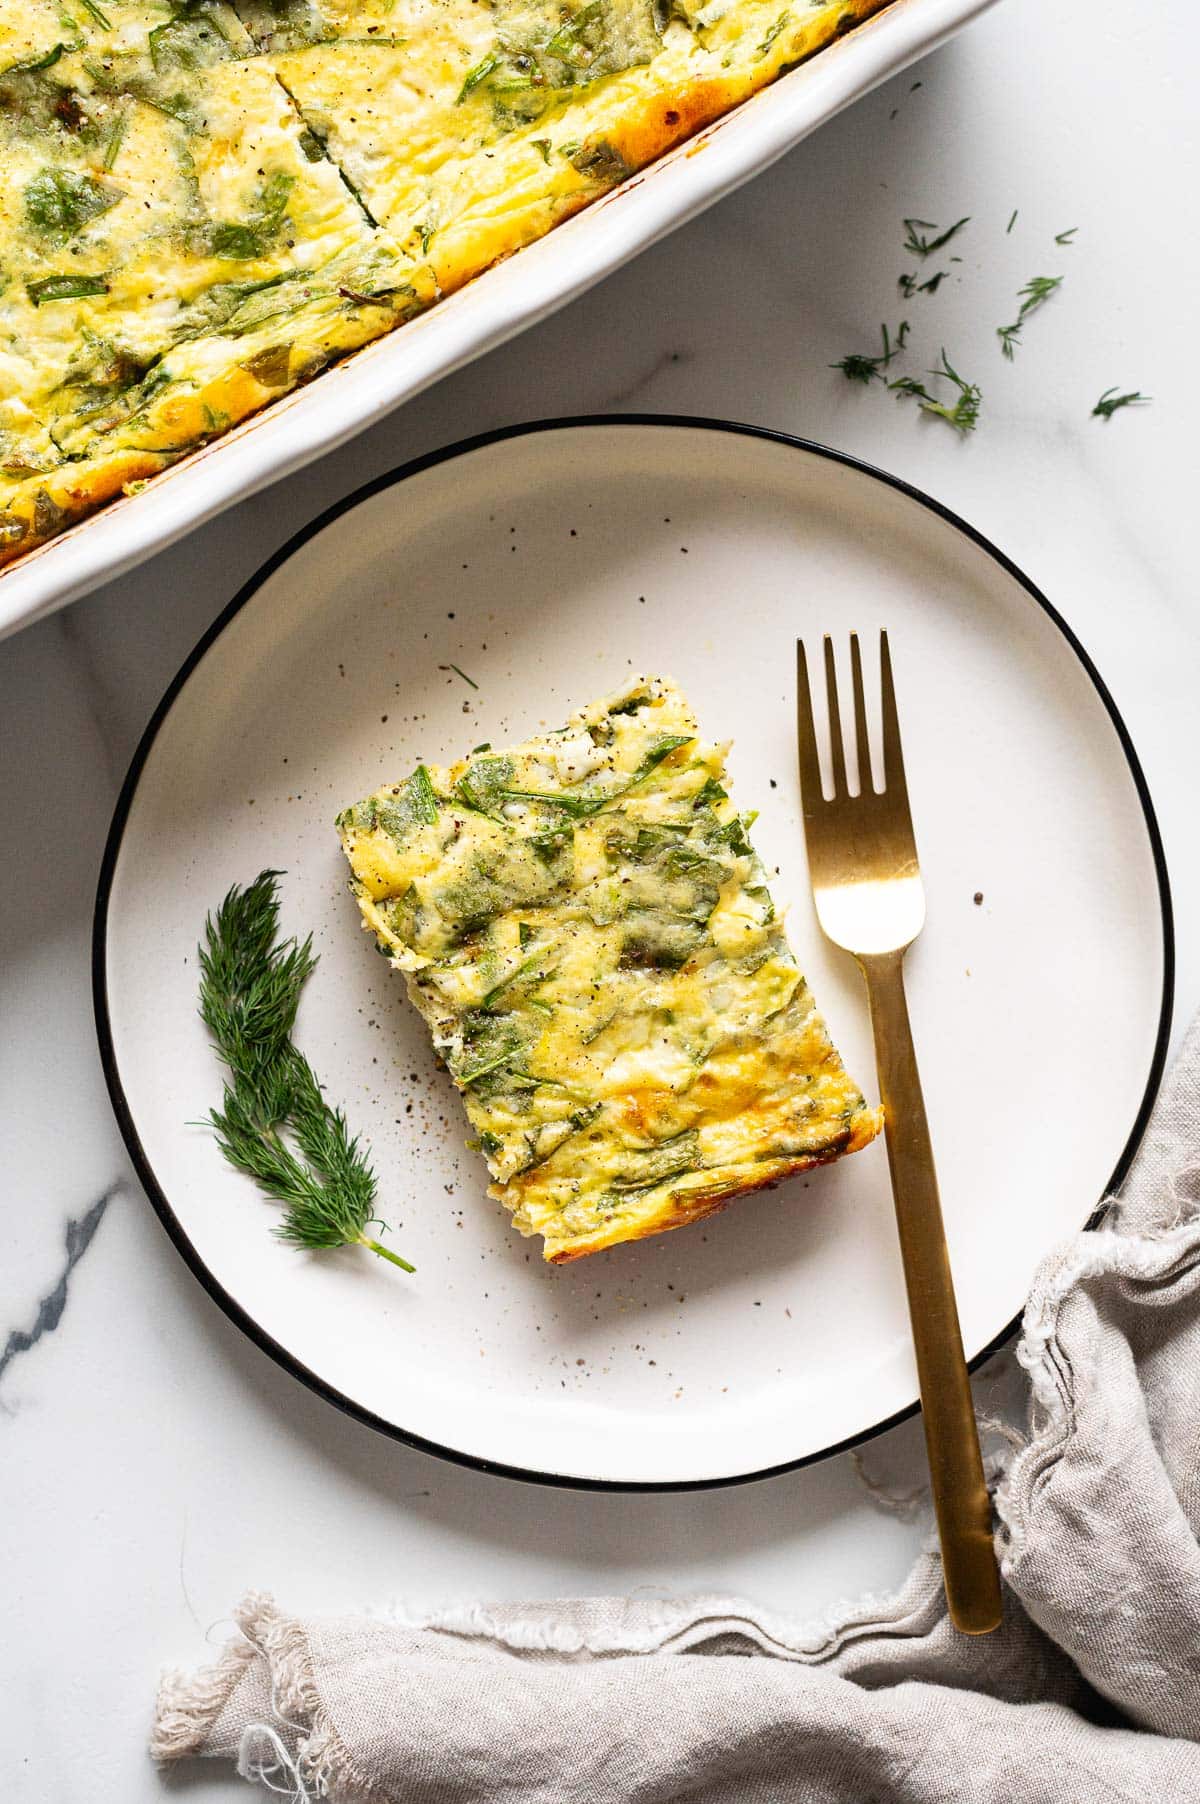 Slice of egg bake on a plate with a fork and dill. Casserole in a dish next to it.